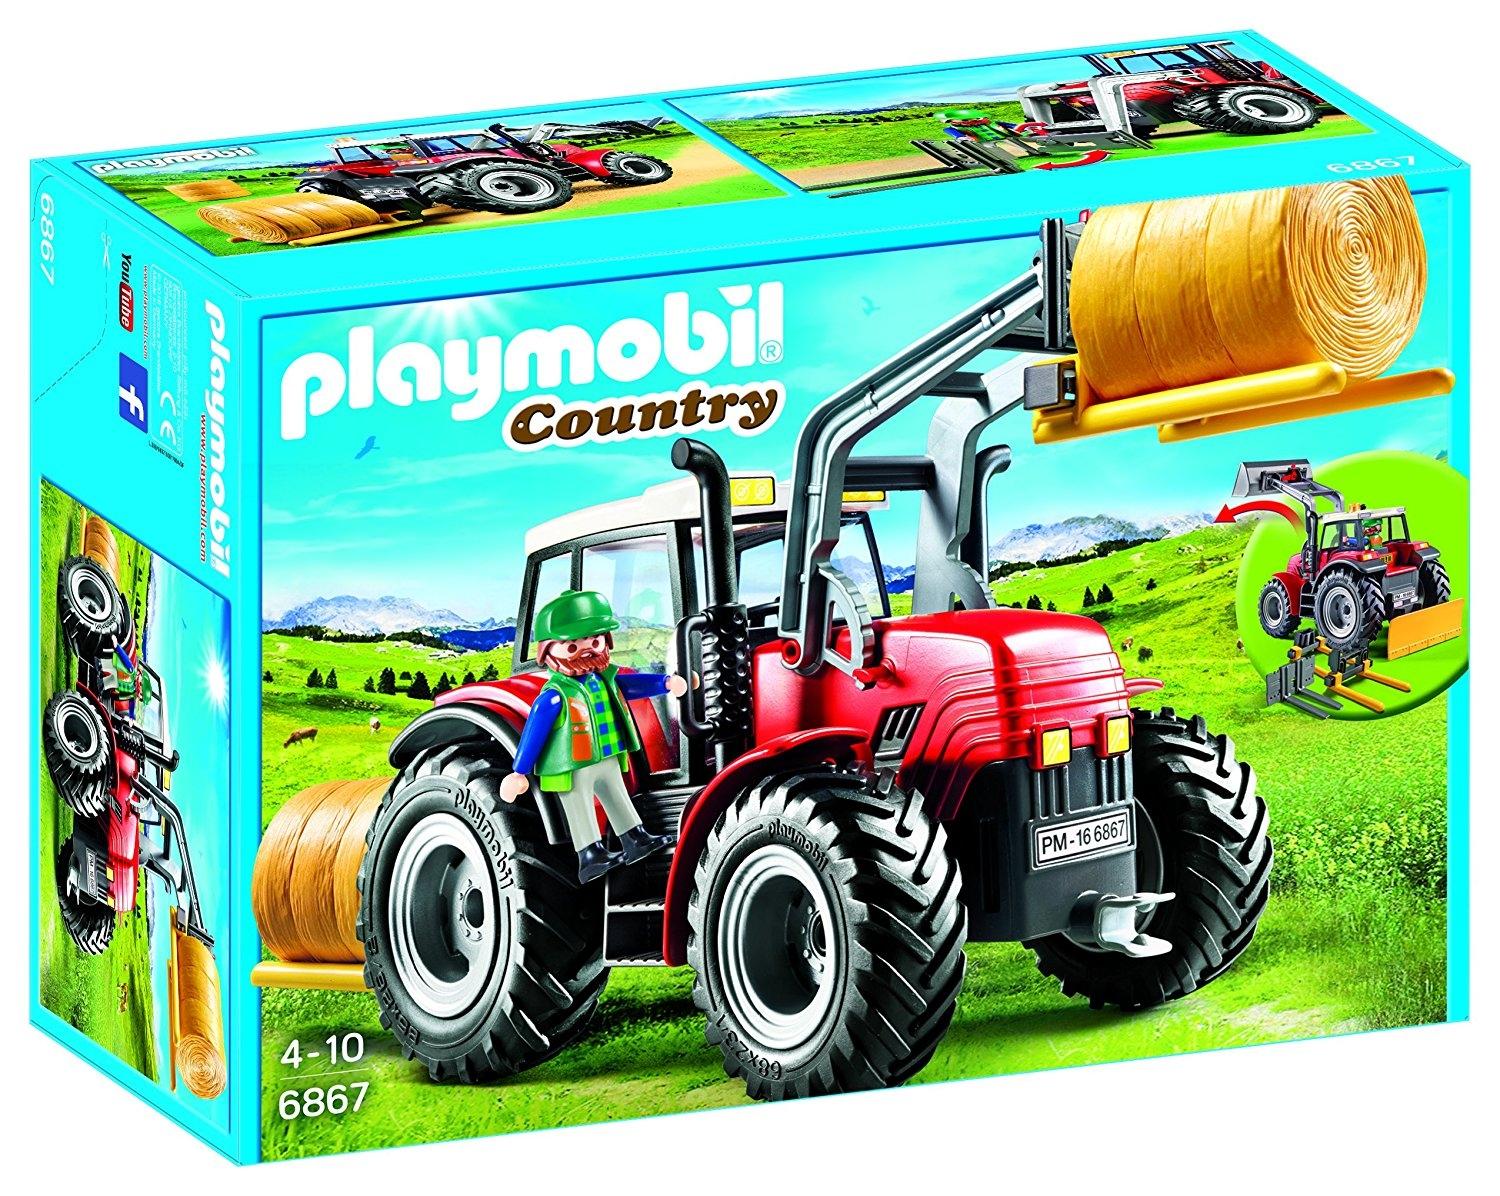 PLAYMOBIL COUNTRY TRACTOR 6867